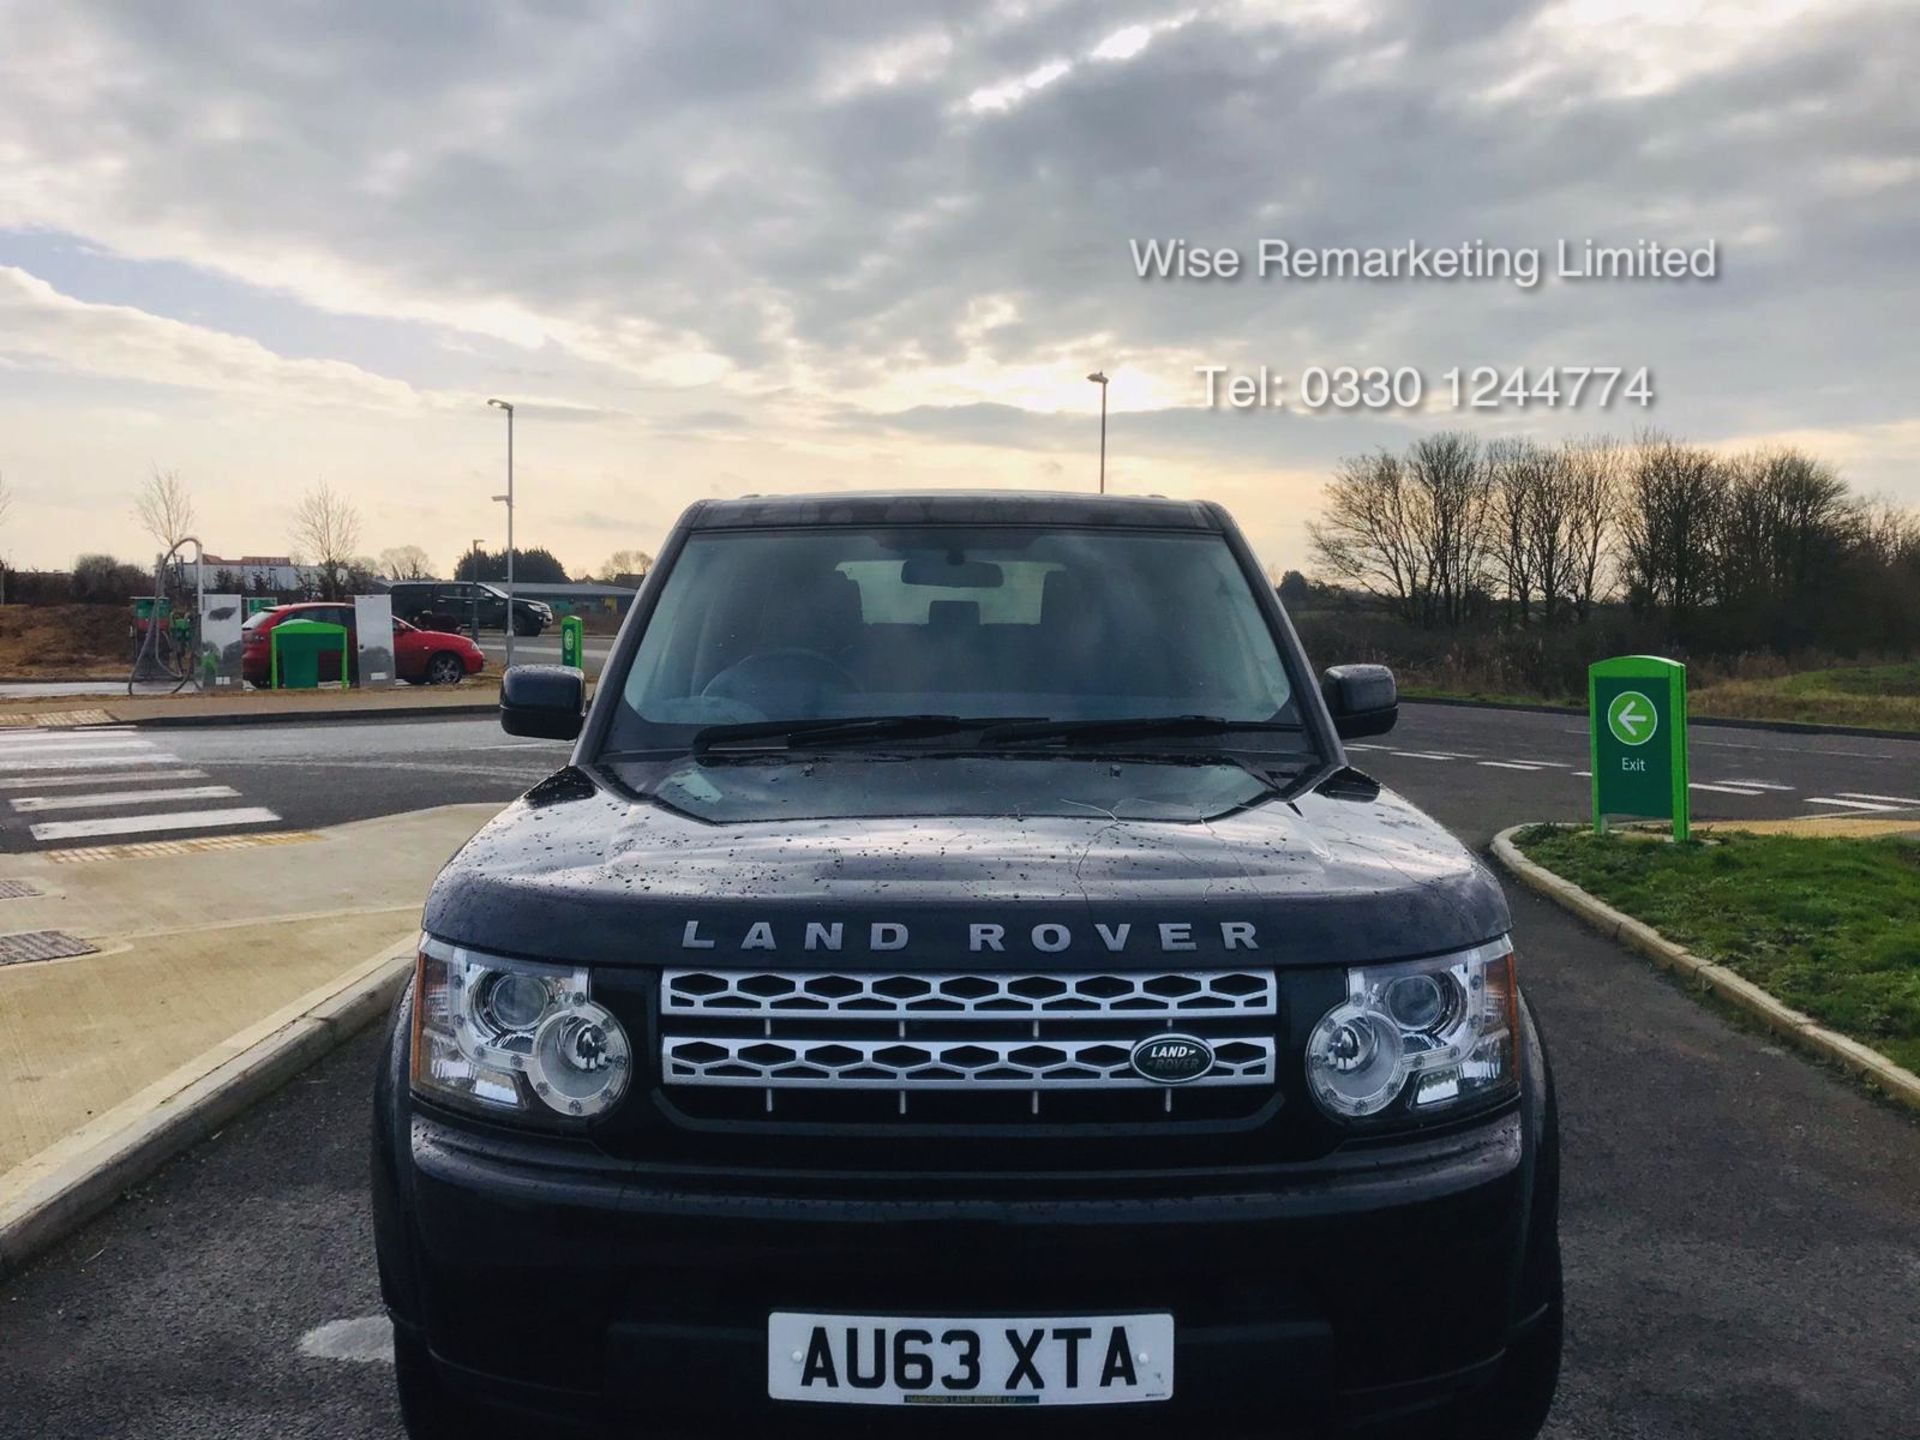 Land Rover Discovery GS 3.0 SDV6 Auto - 2014 Model - 7 Seater - 1 Owner From New - Image 5 of 19